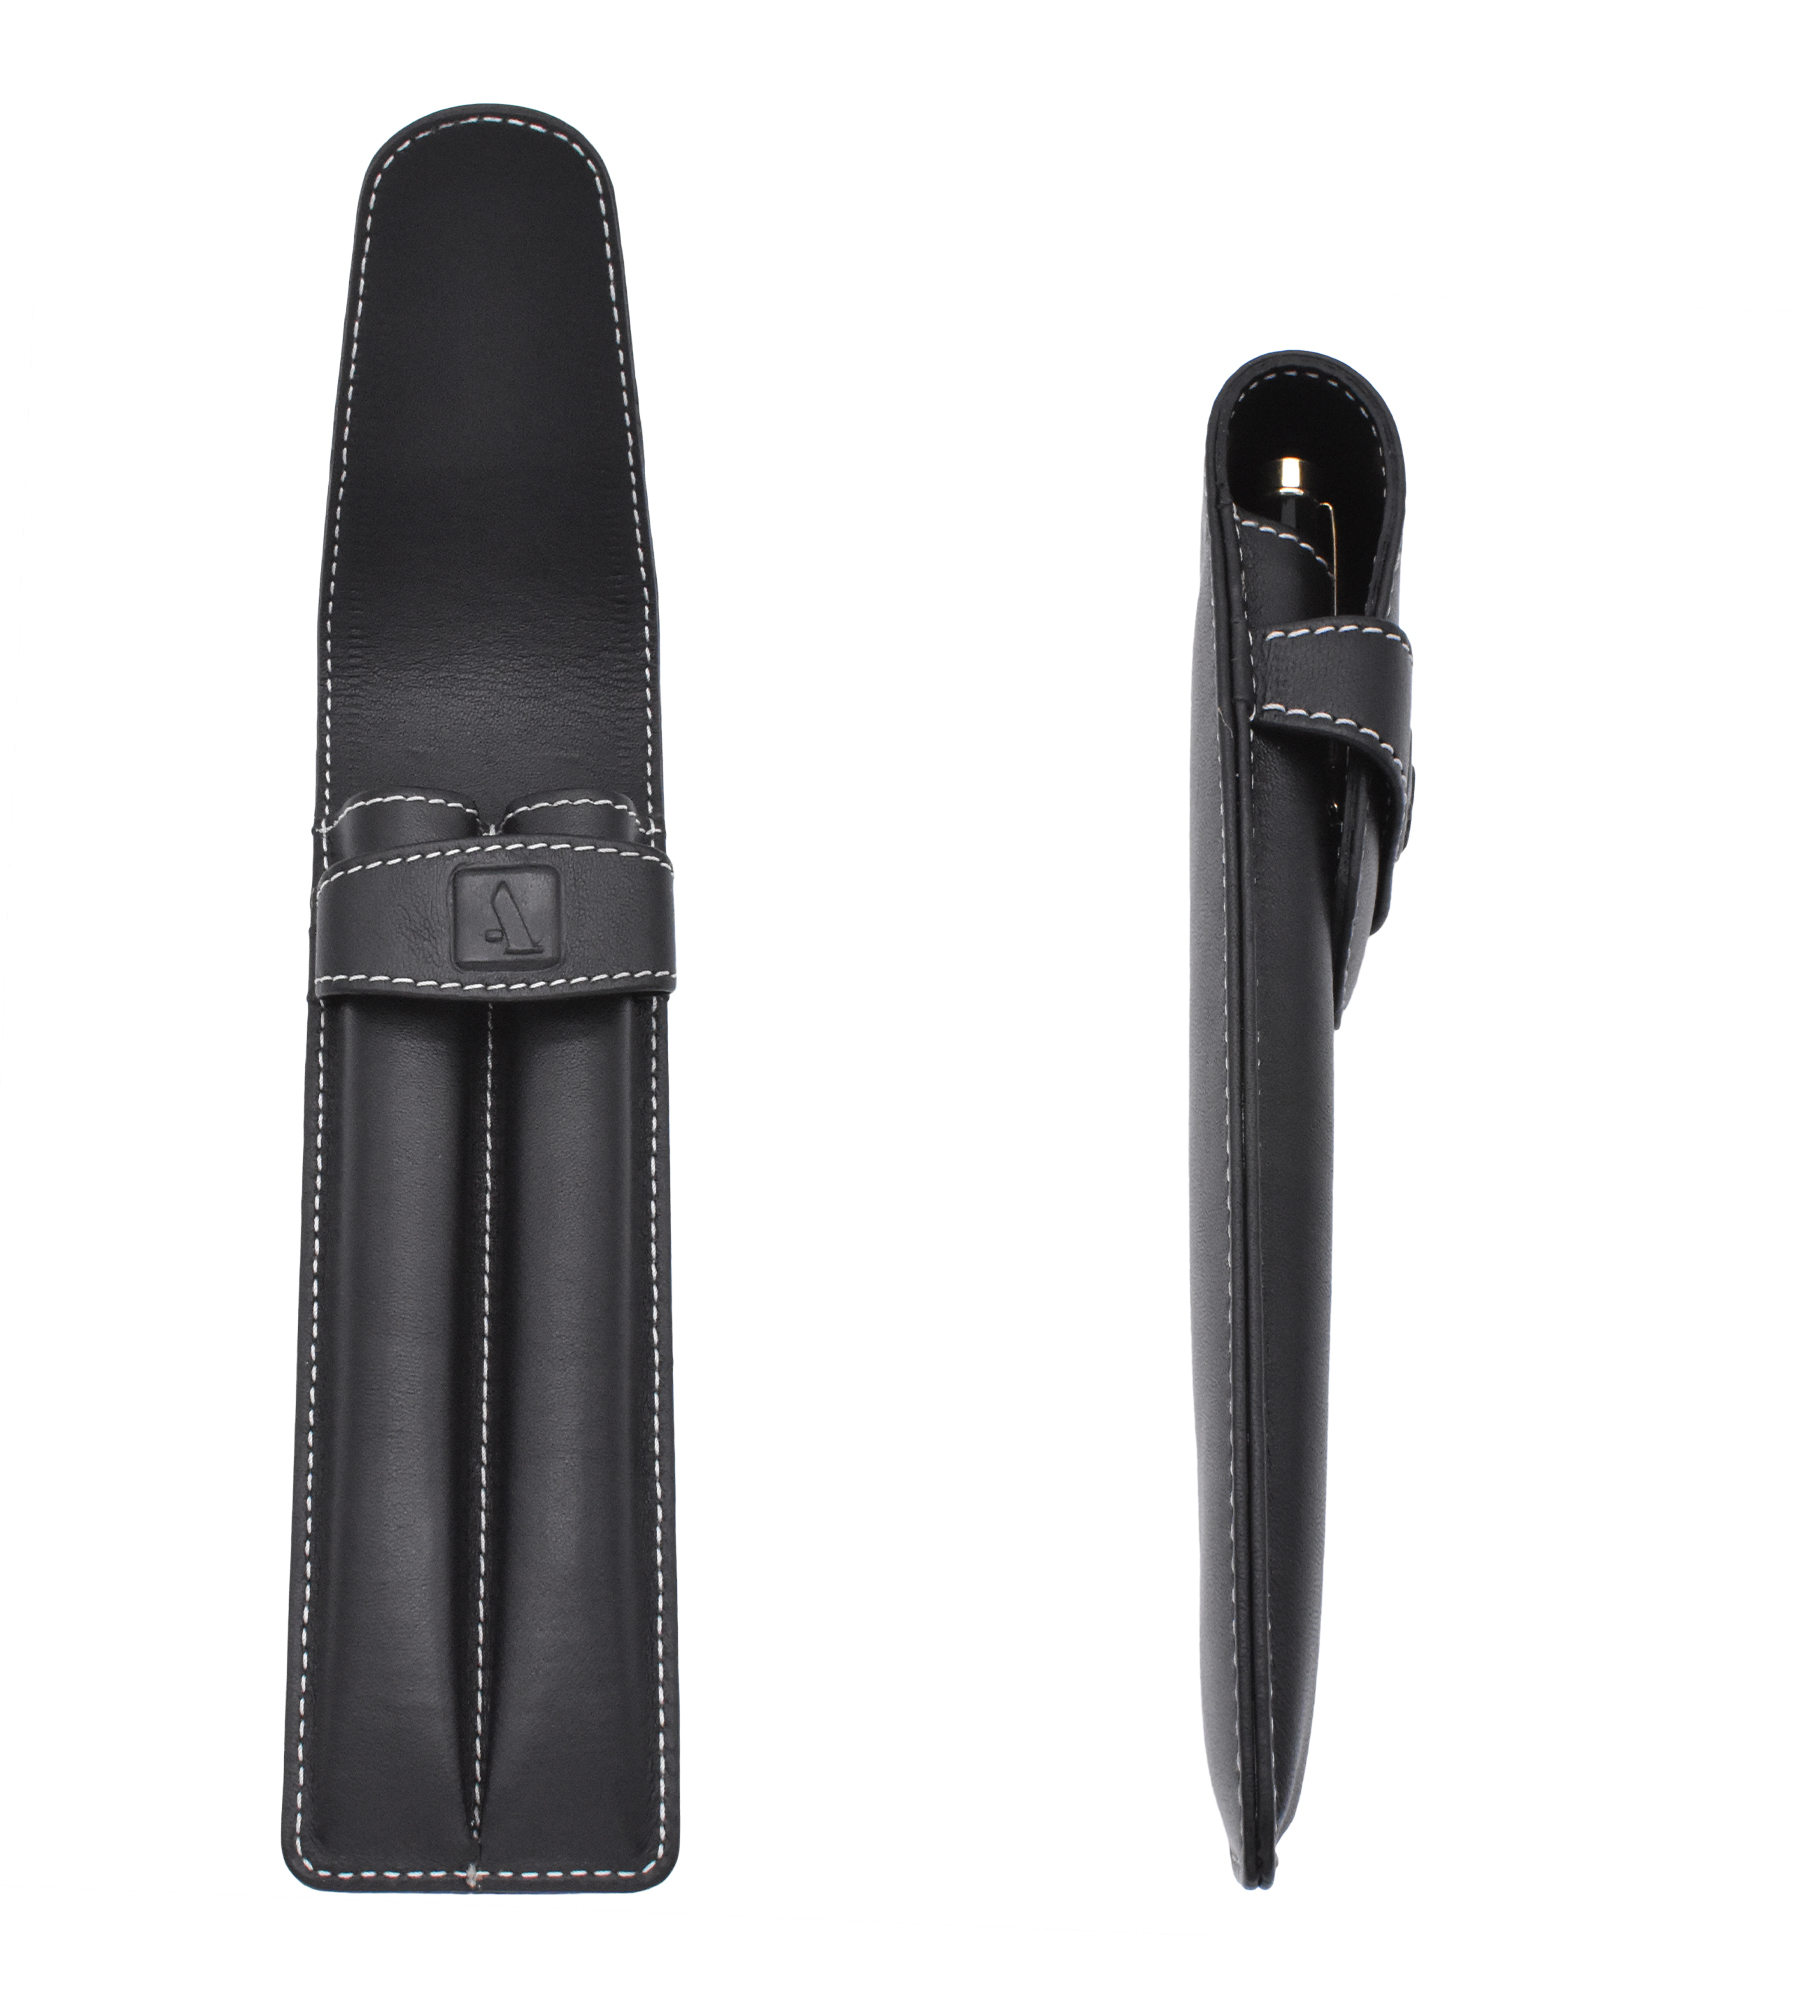 W51--Pen case to carry 2 pens in Genuine Leather - Black